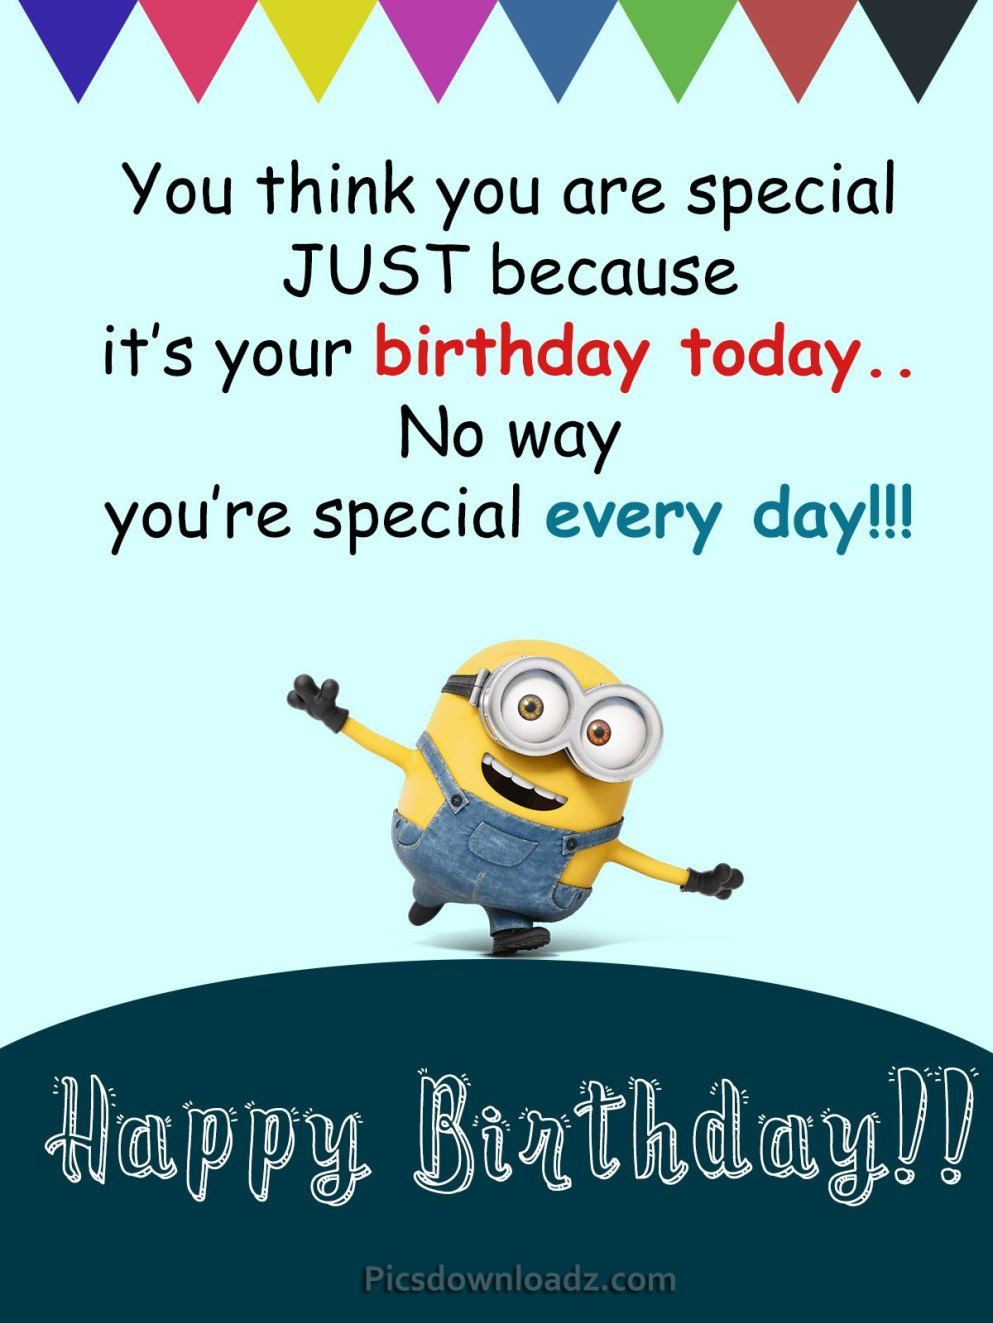 Funny Birthday Wishes For A Friend
 Funny Happy Birthday Wishes for Best Friend – Happy